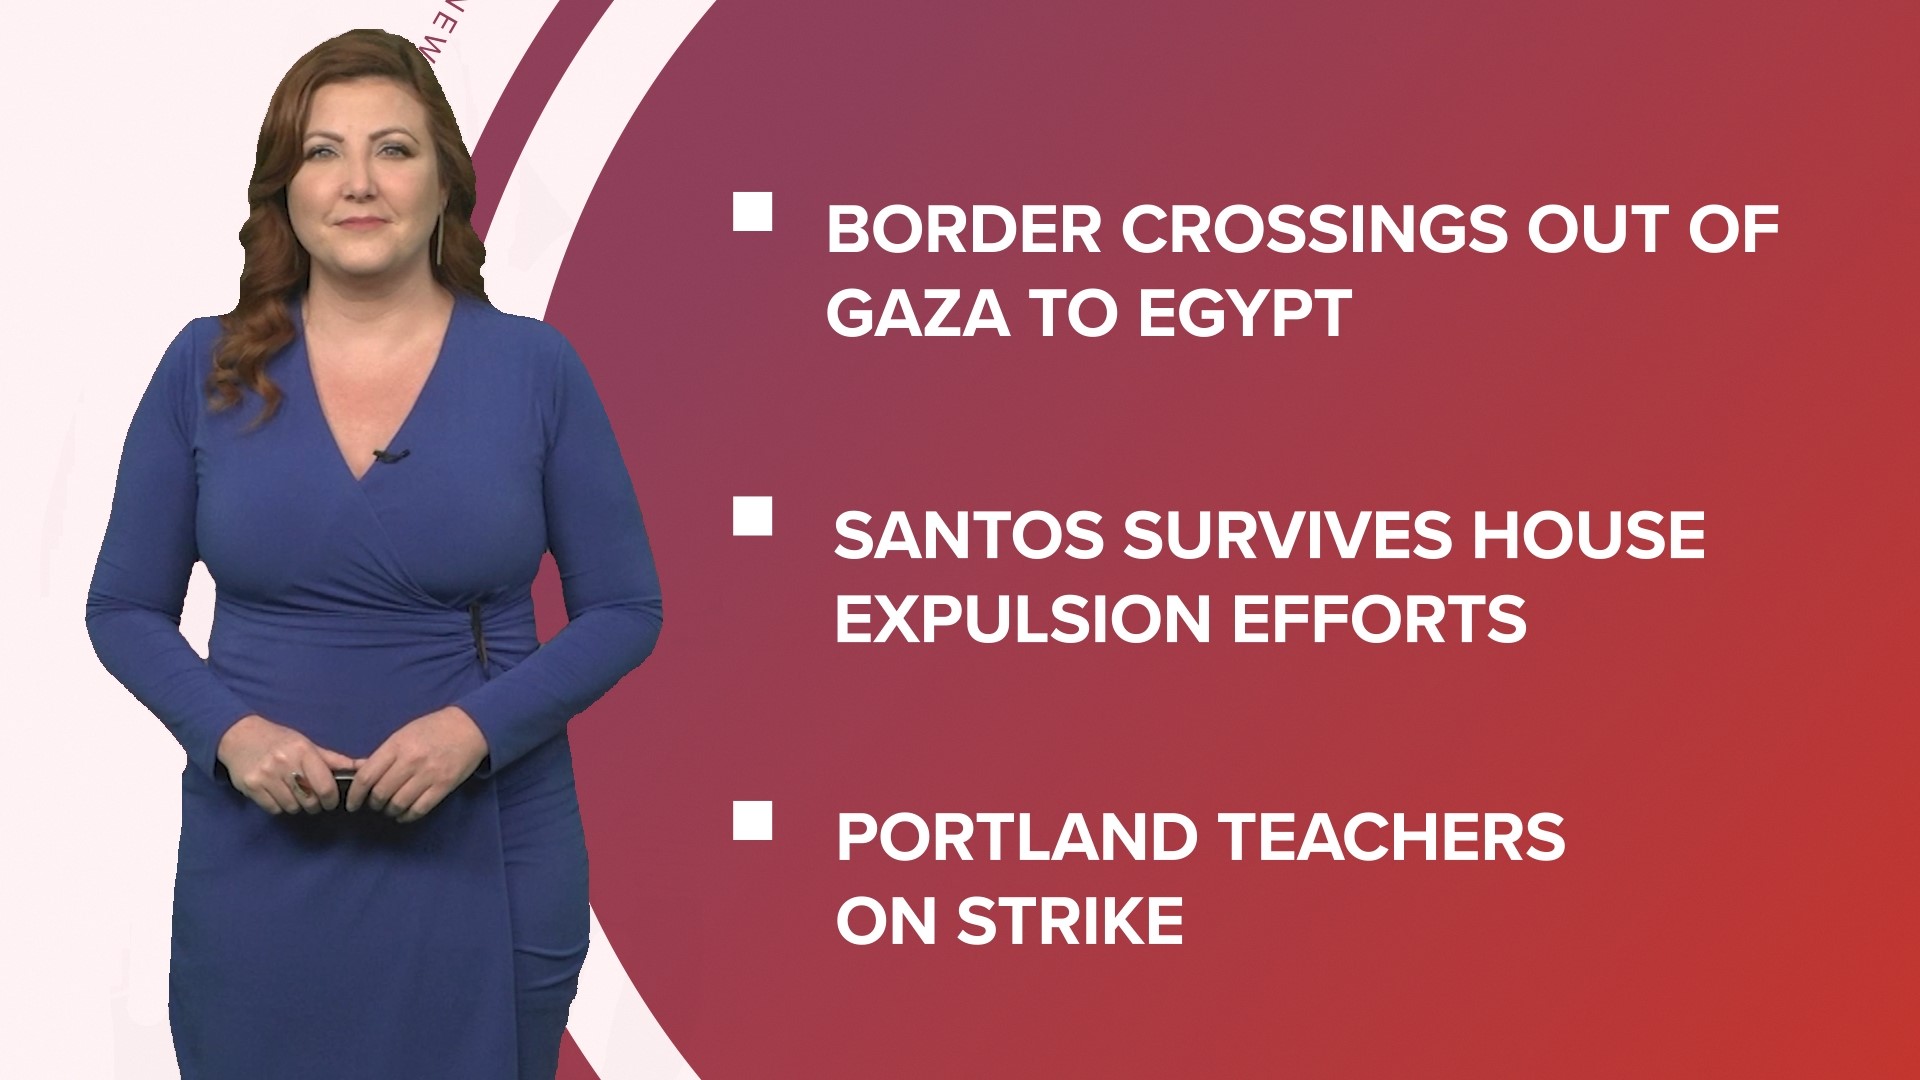 A look at what is happening in the news from border crossings out of Gaza to Portland teachers on strike and Texas Rangers win first World Series.